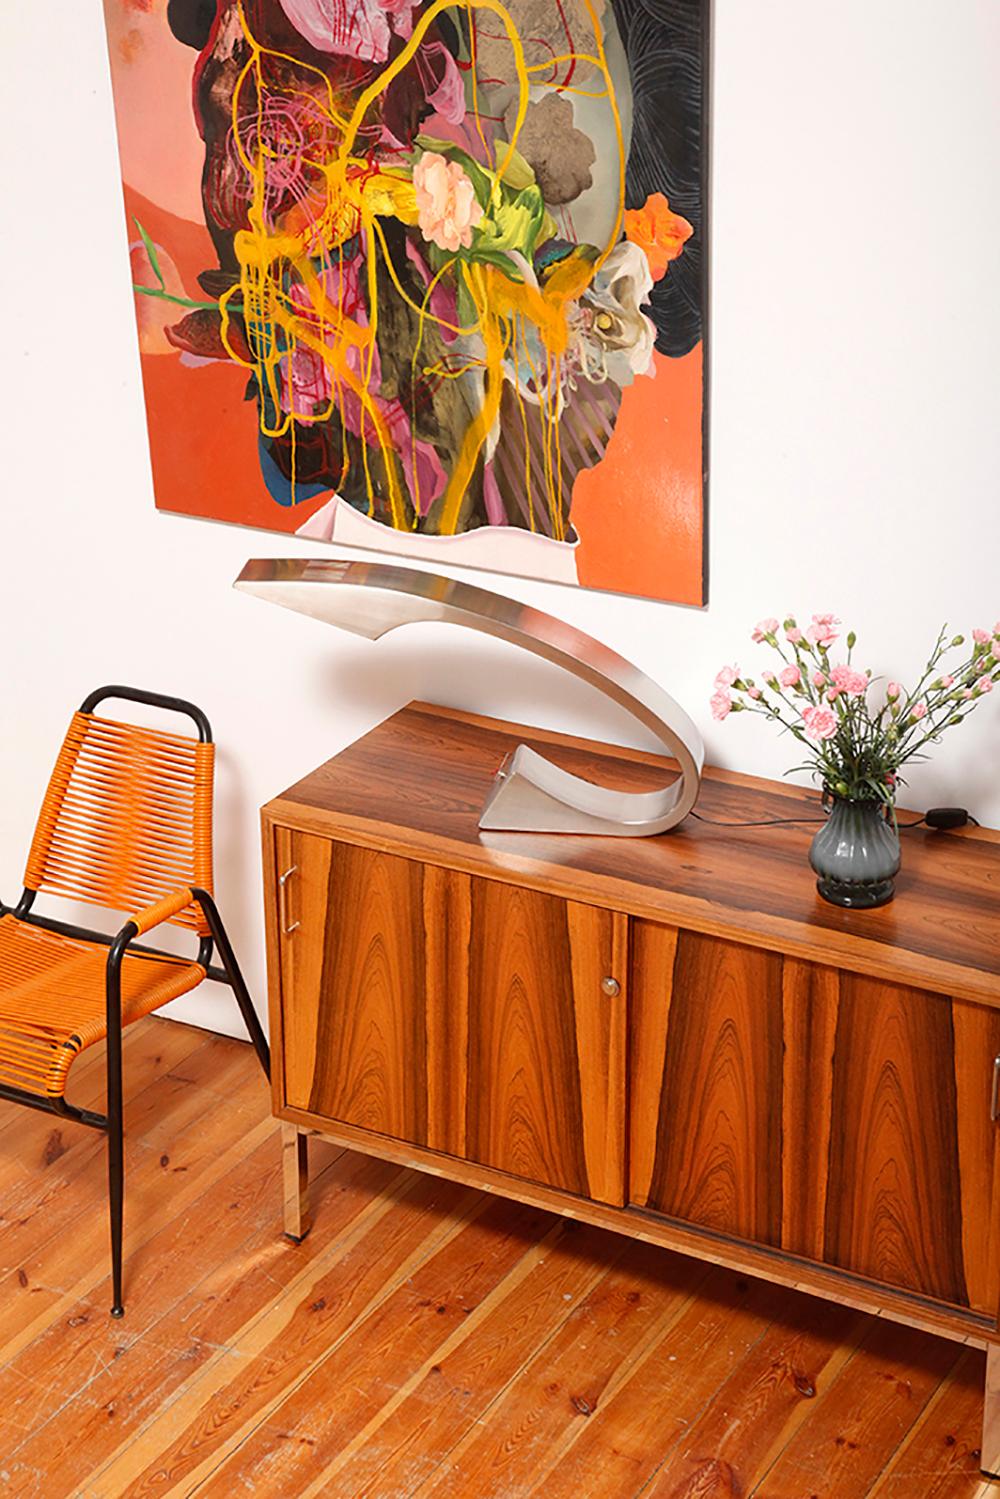 Large Steel Cabinet Lamp with a Small Clock 'Impala' by Fase, Spain 1970s In Good Condition For Sale In WARSZAWA, PL